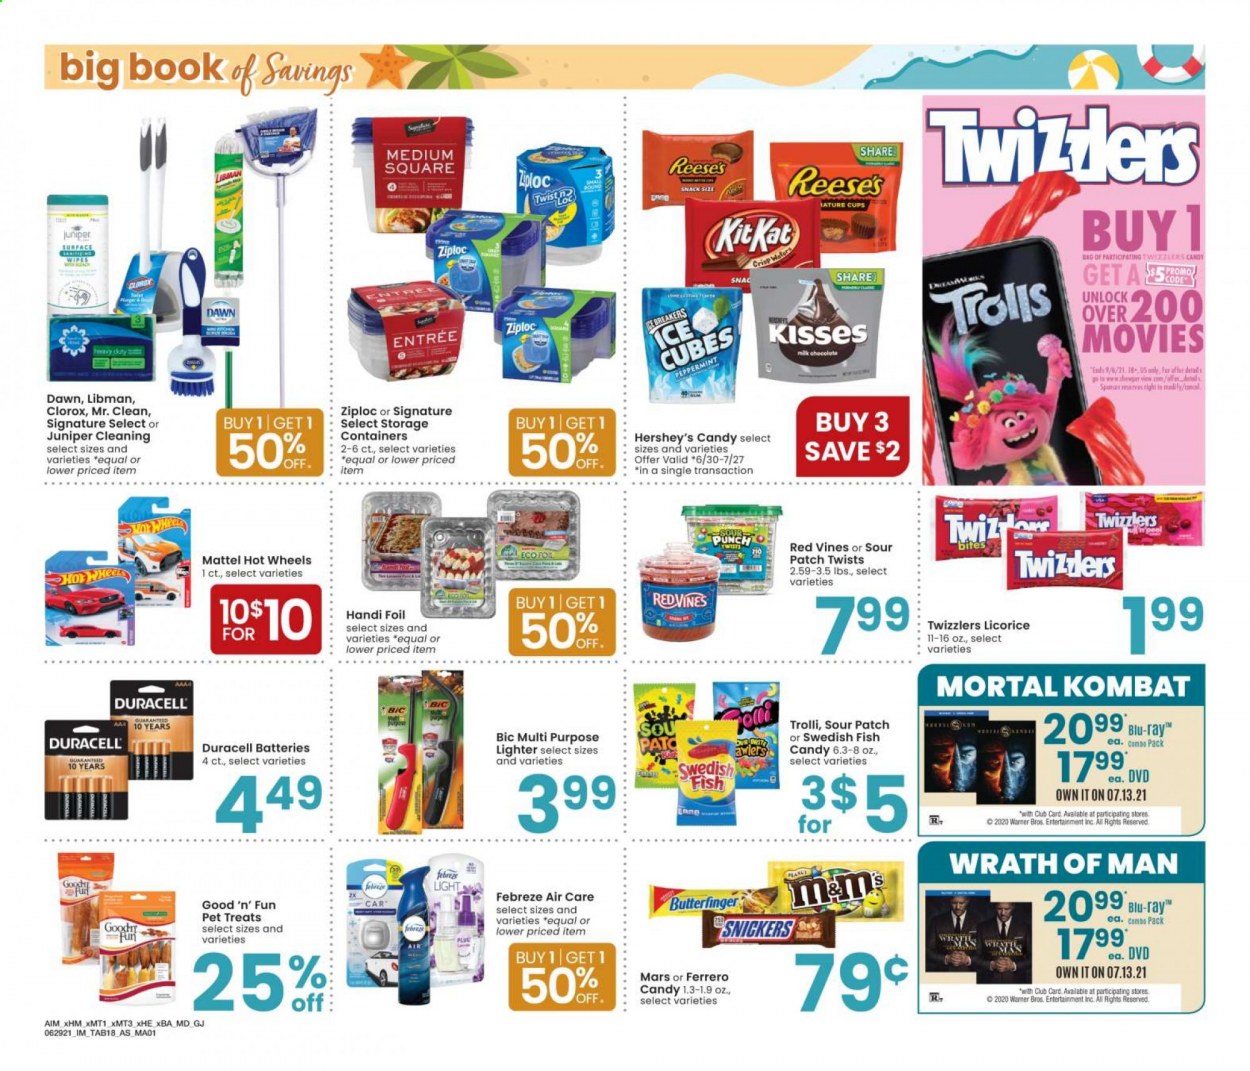 thumbnail - Albertsons Flyer - 06/29/2021 - 07/26/2021 - Sales products - milk, Reese's, Hershey's, ice cubes, snack, Trolli, Ferrero Rocher, Snickers, Mars, sour patch, wipes, Febreze, Clorox, BIC, Ziploc, cup, storage box, battery, Duracell, Good 'n' Fun, Mattel, Hot Wheels. Page 18.